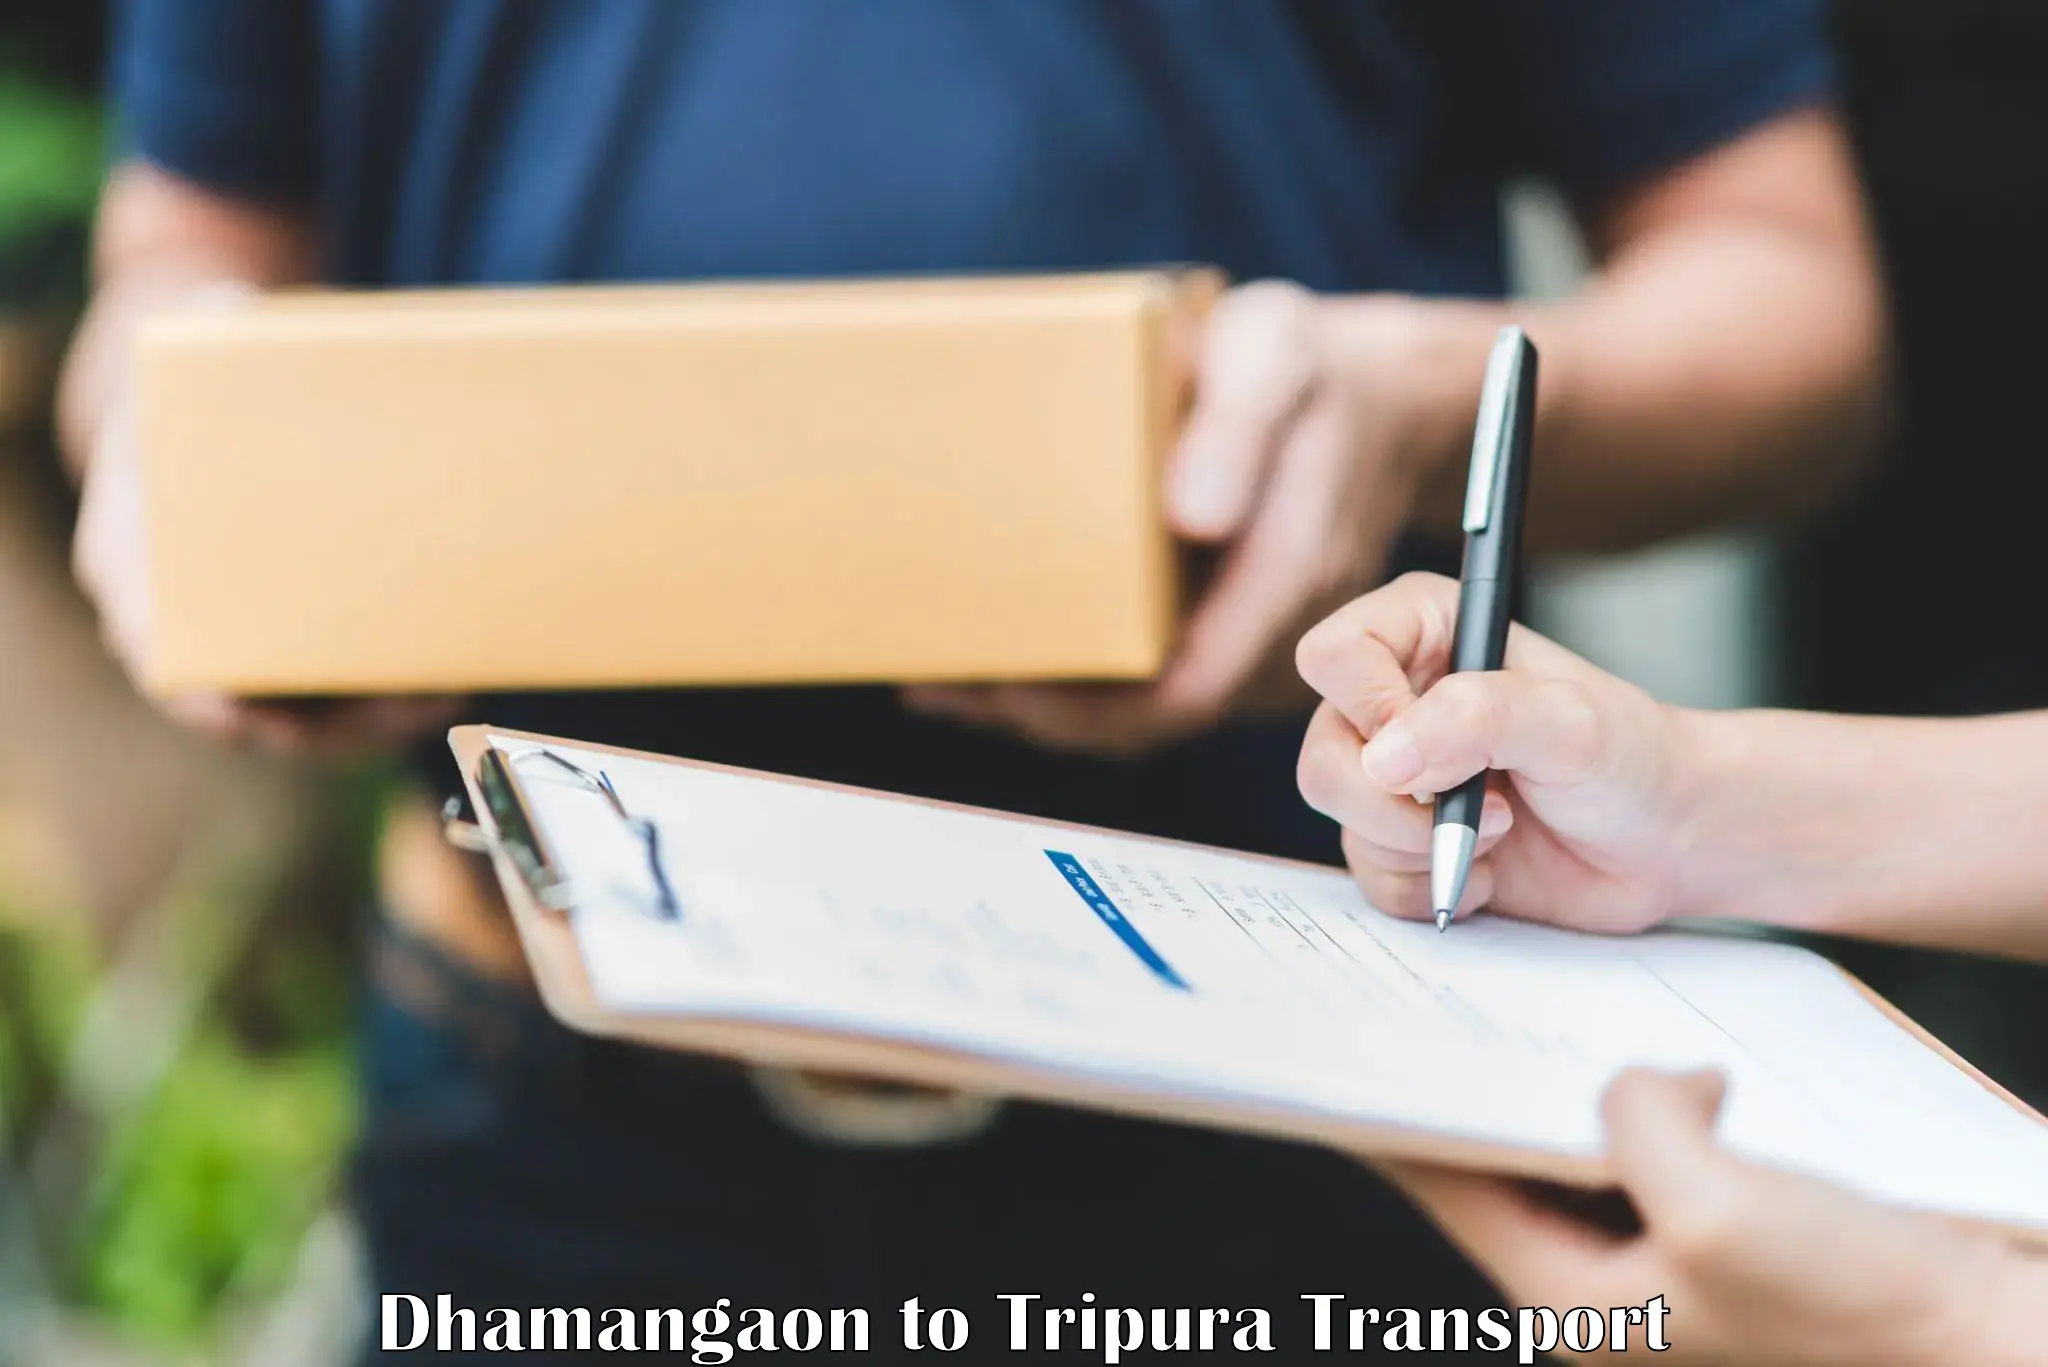 Commercial transport service Dhamangaon to Tripura